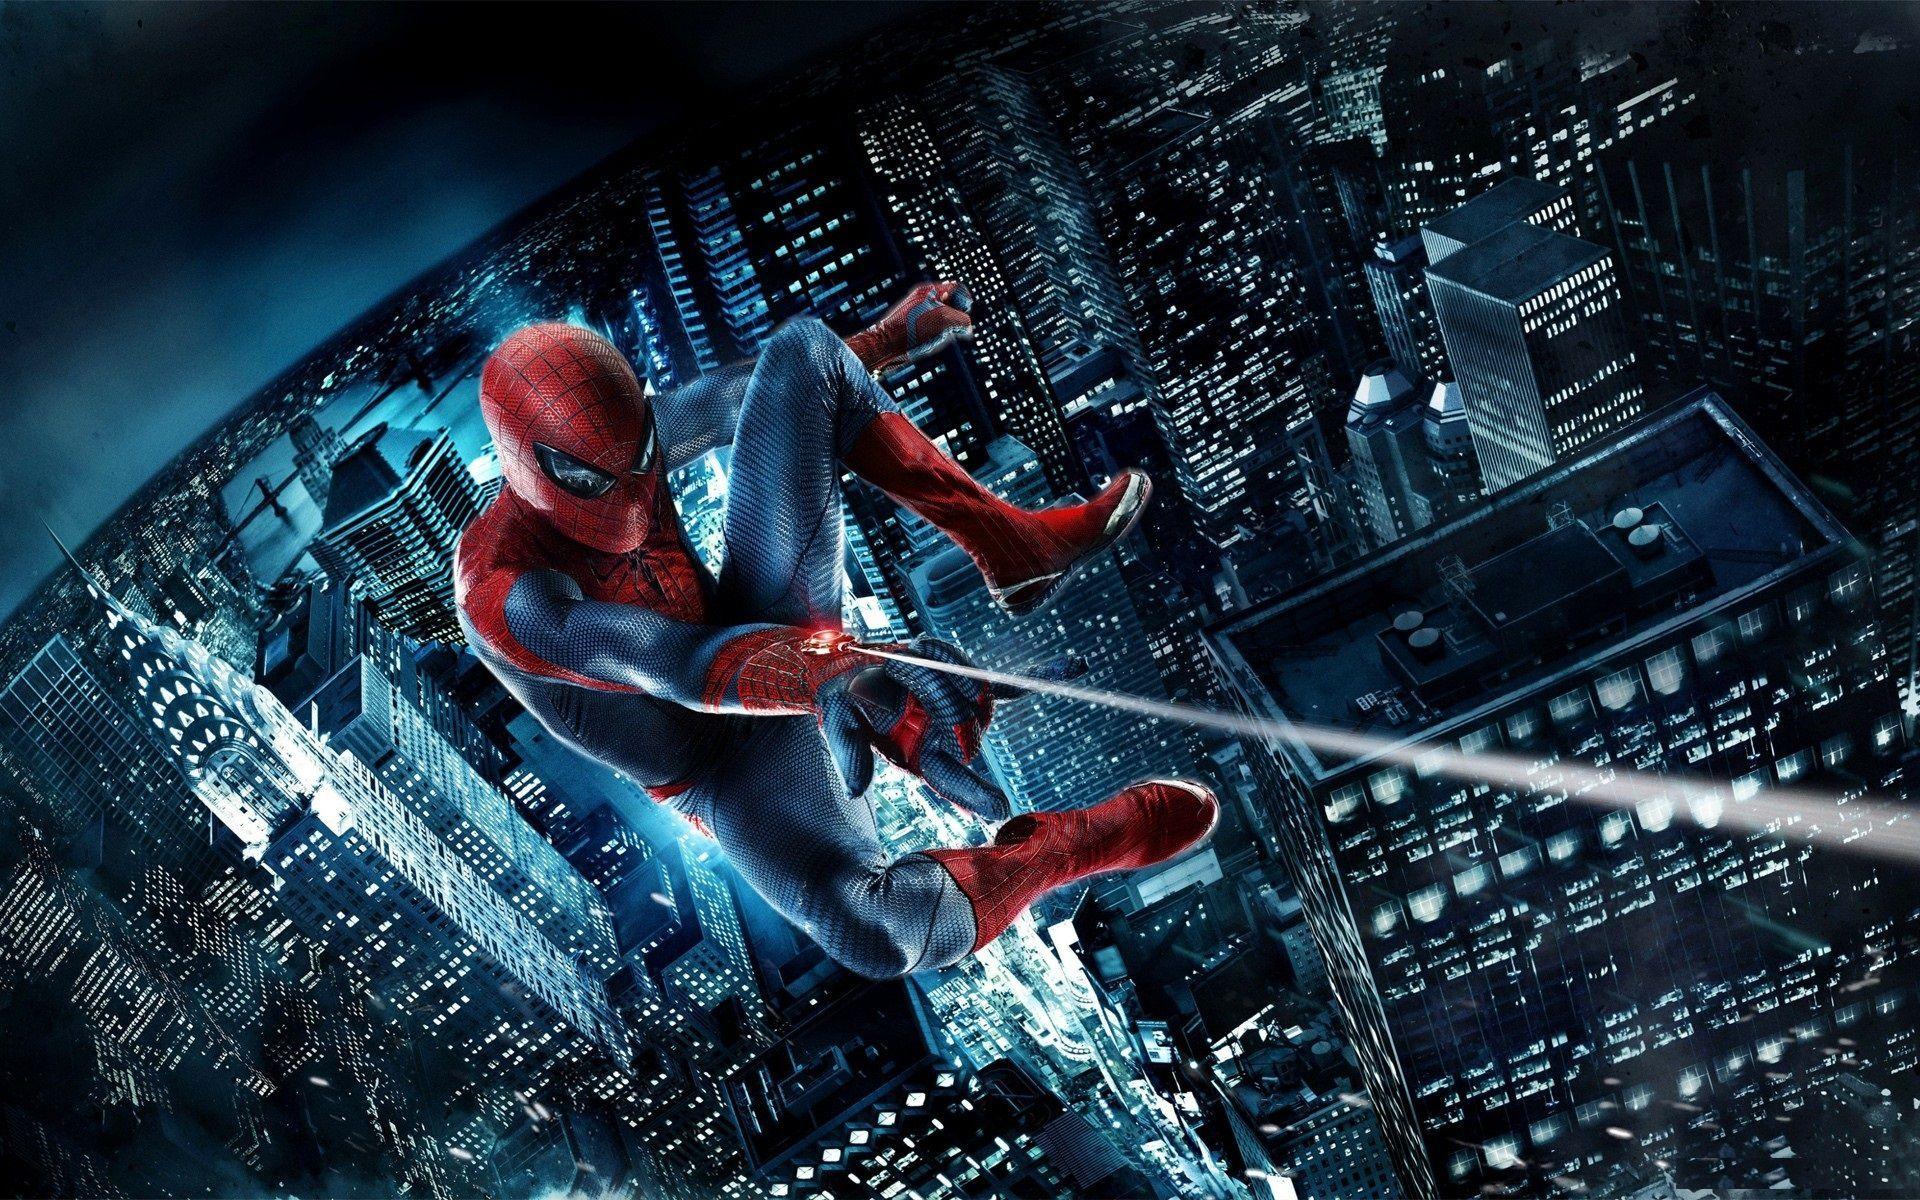 Spiderman Wallpaper with High Resolution Wallpaper The Avengers. HD